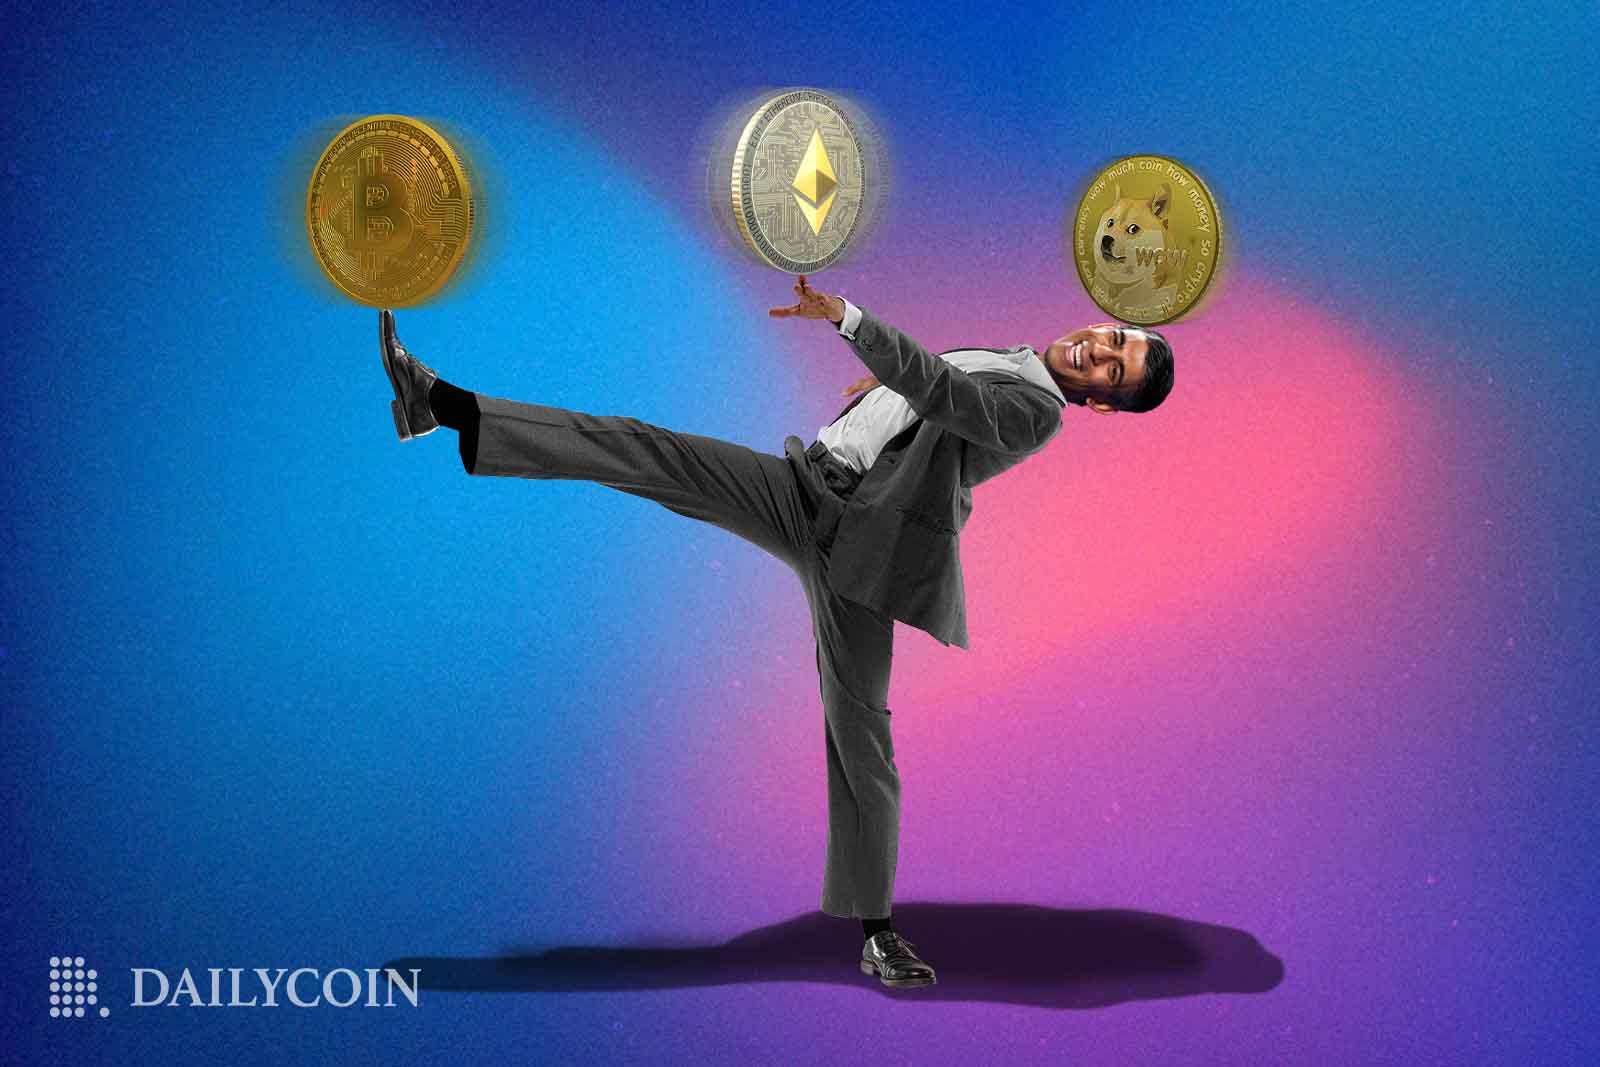 UK Prime Minister Rishi Sunak kicking his right leg into the air while balancing cryptocurrencies on his head, outstretch left hand and right foot